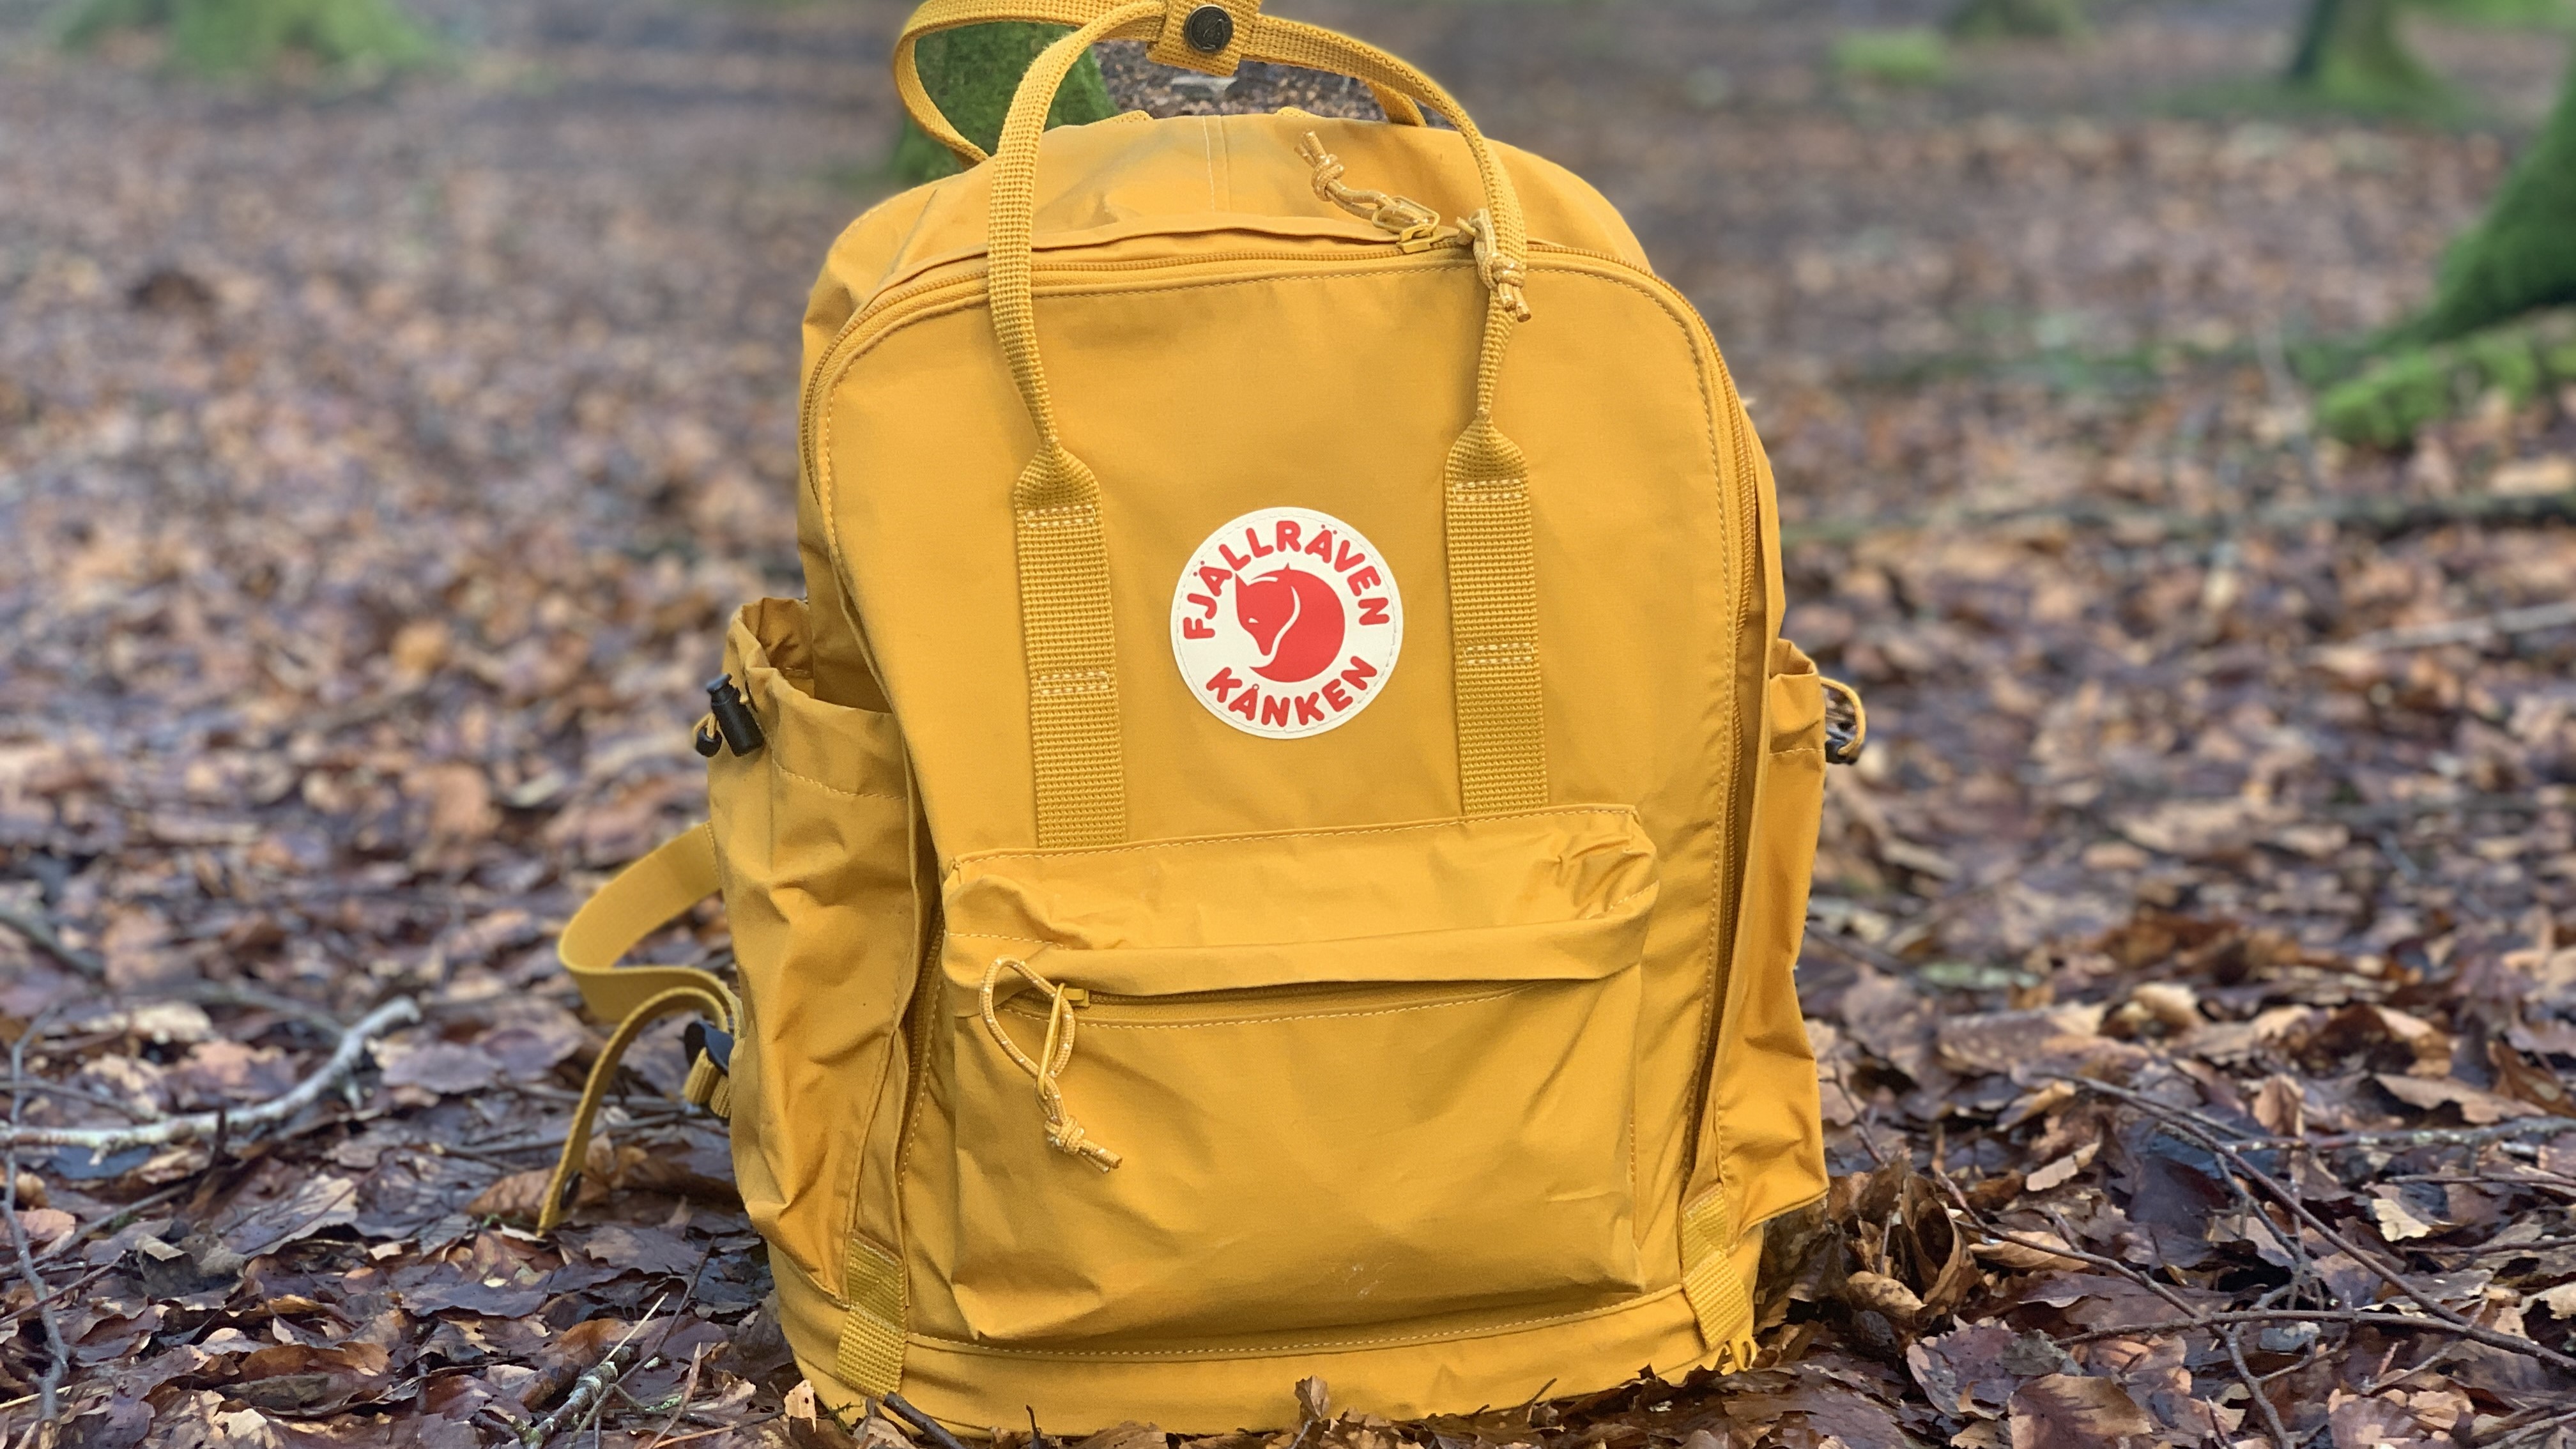 Fjällräven - What works as well on a bike, as on a hike or under a